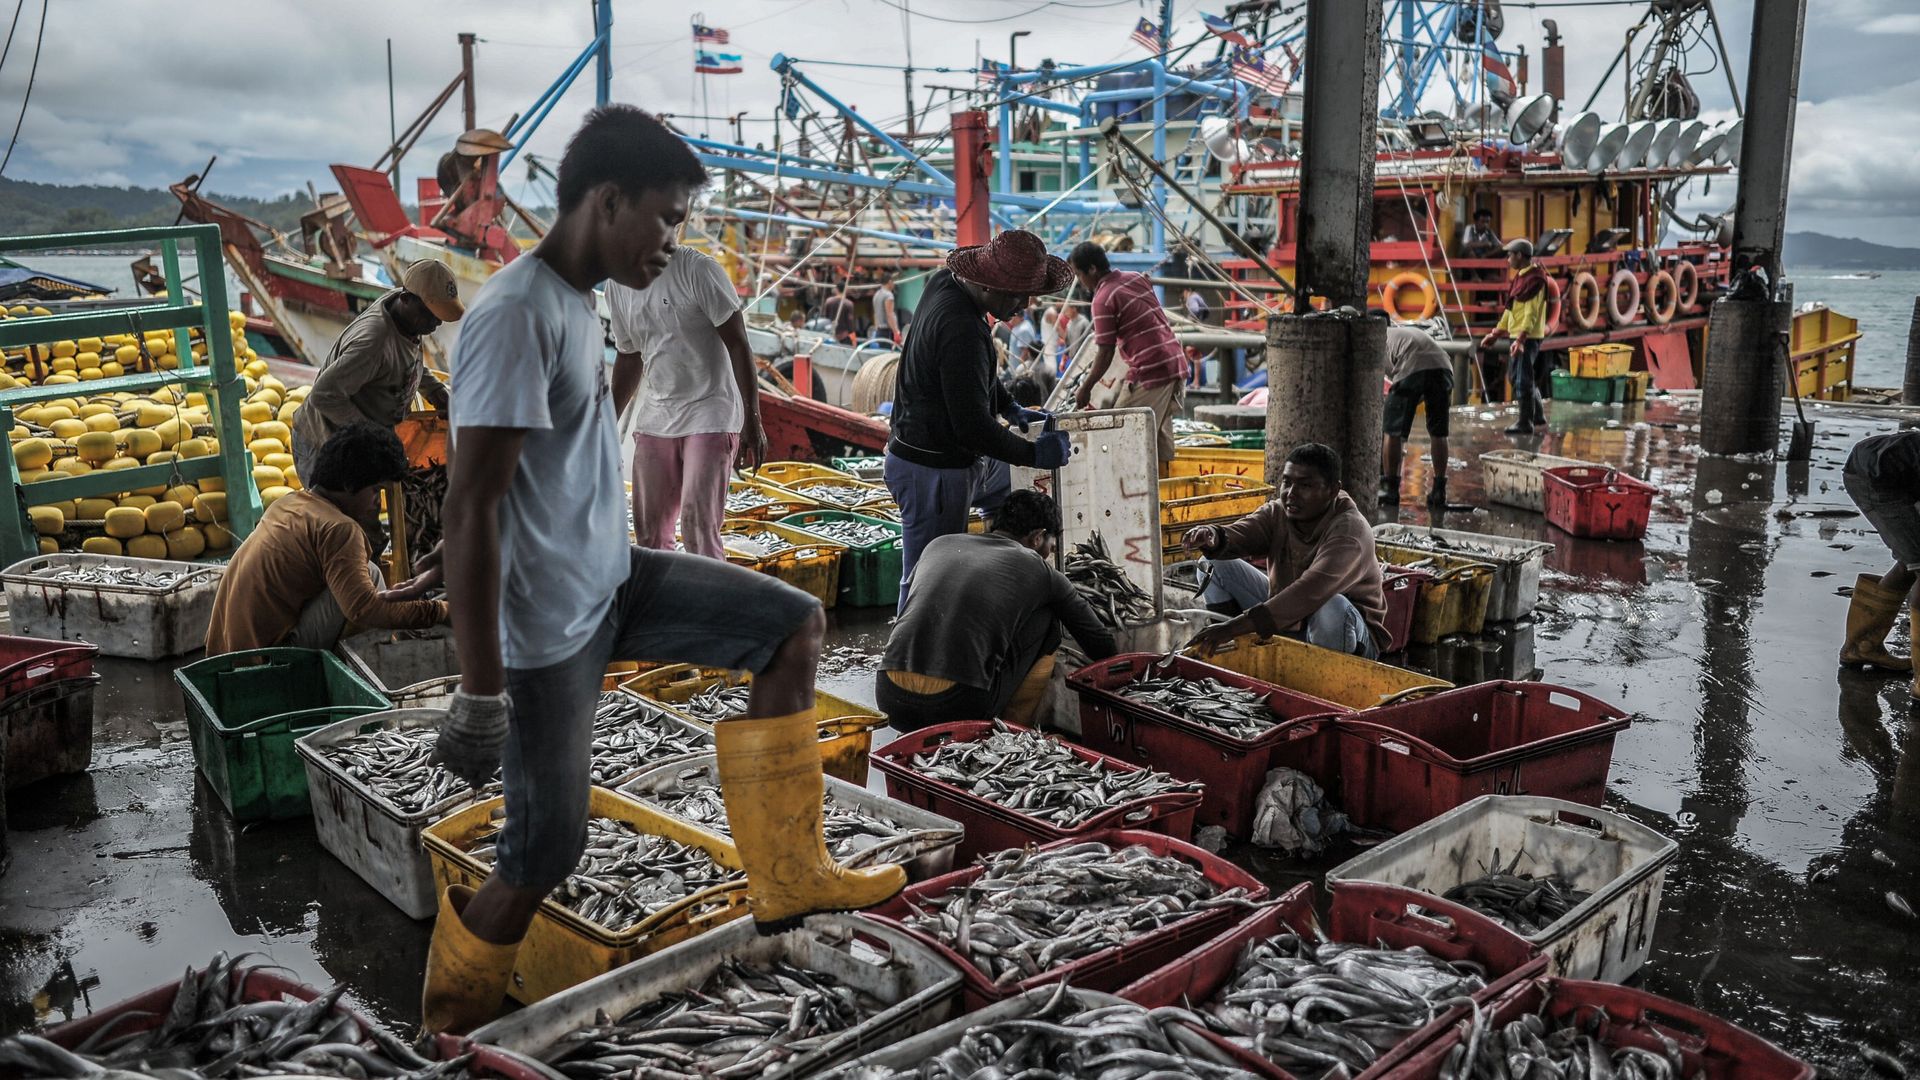 Fisherman stands with his boot on a crate of fresh fish